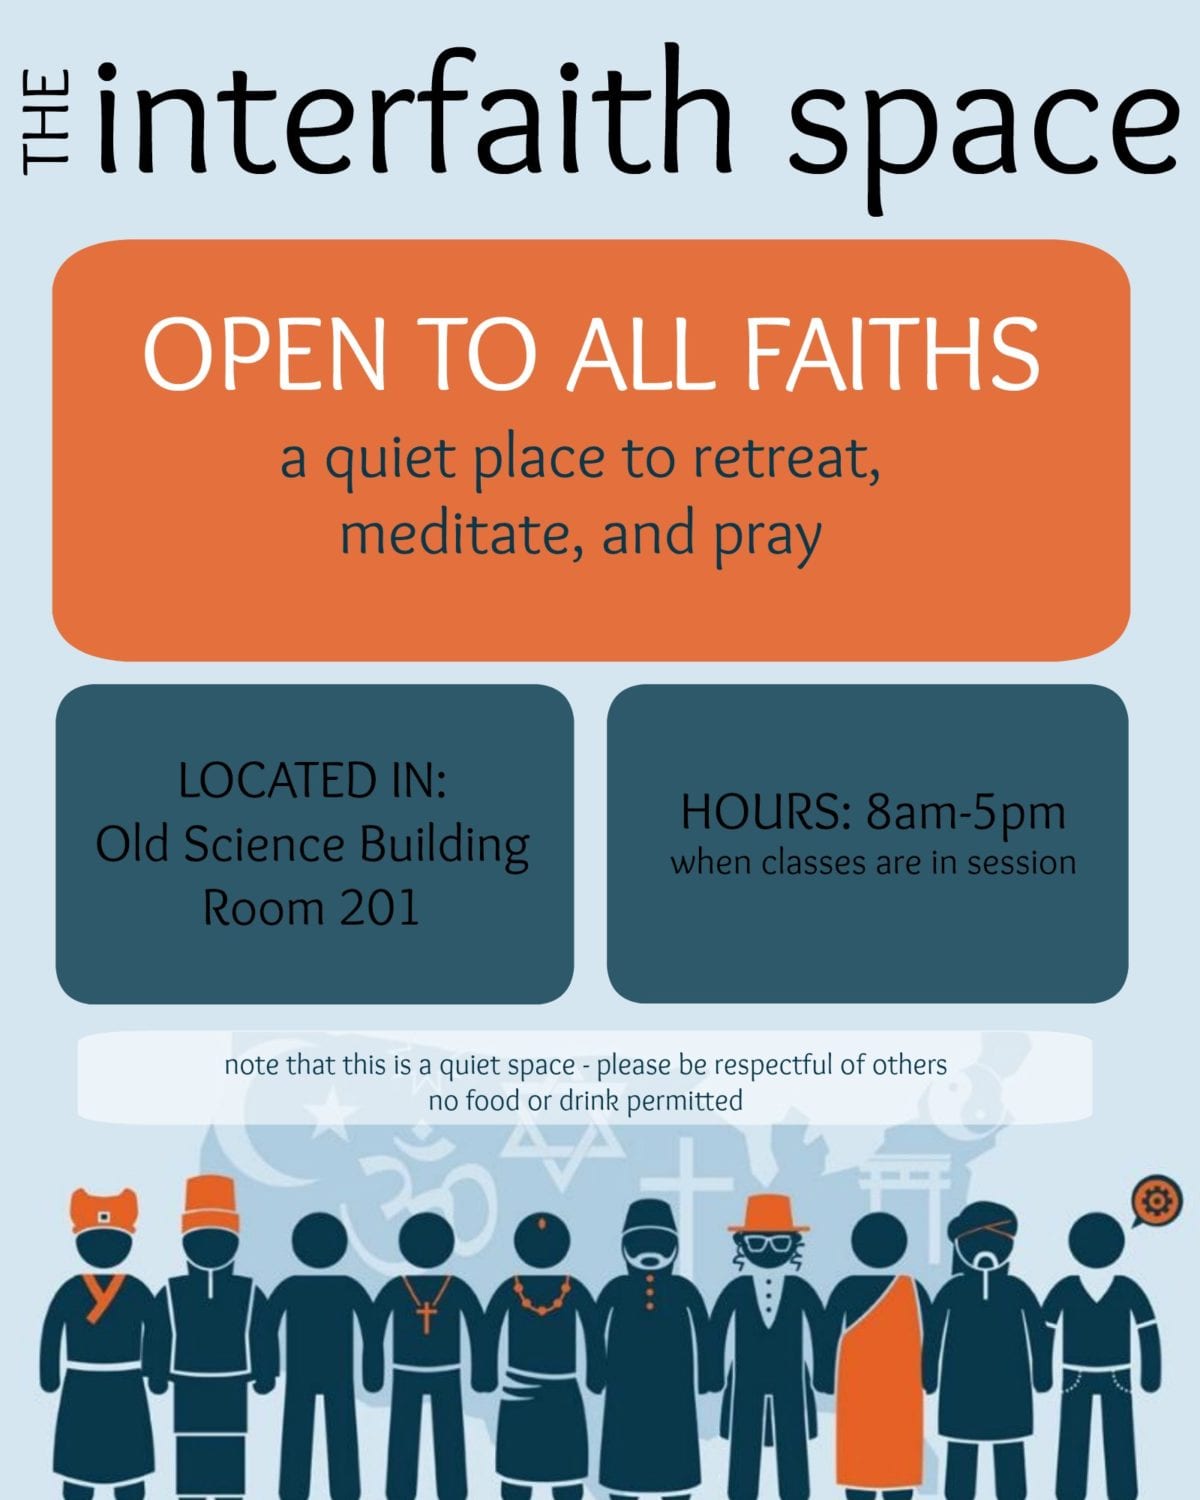 Looking for a place to pray or meditate on campus? Check out Interfaith Space